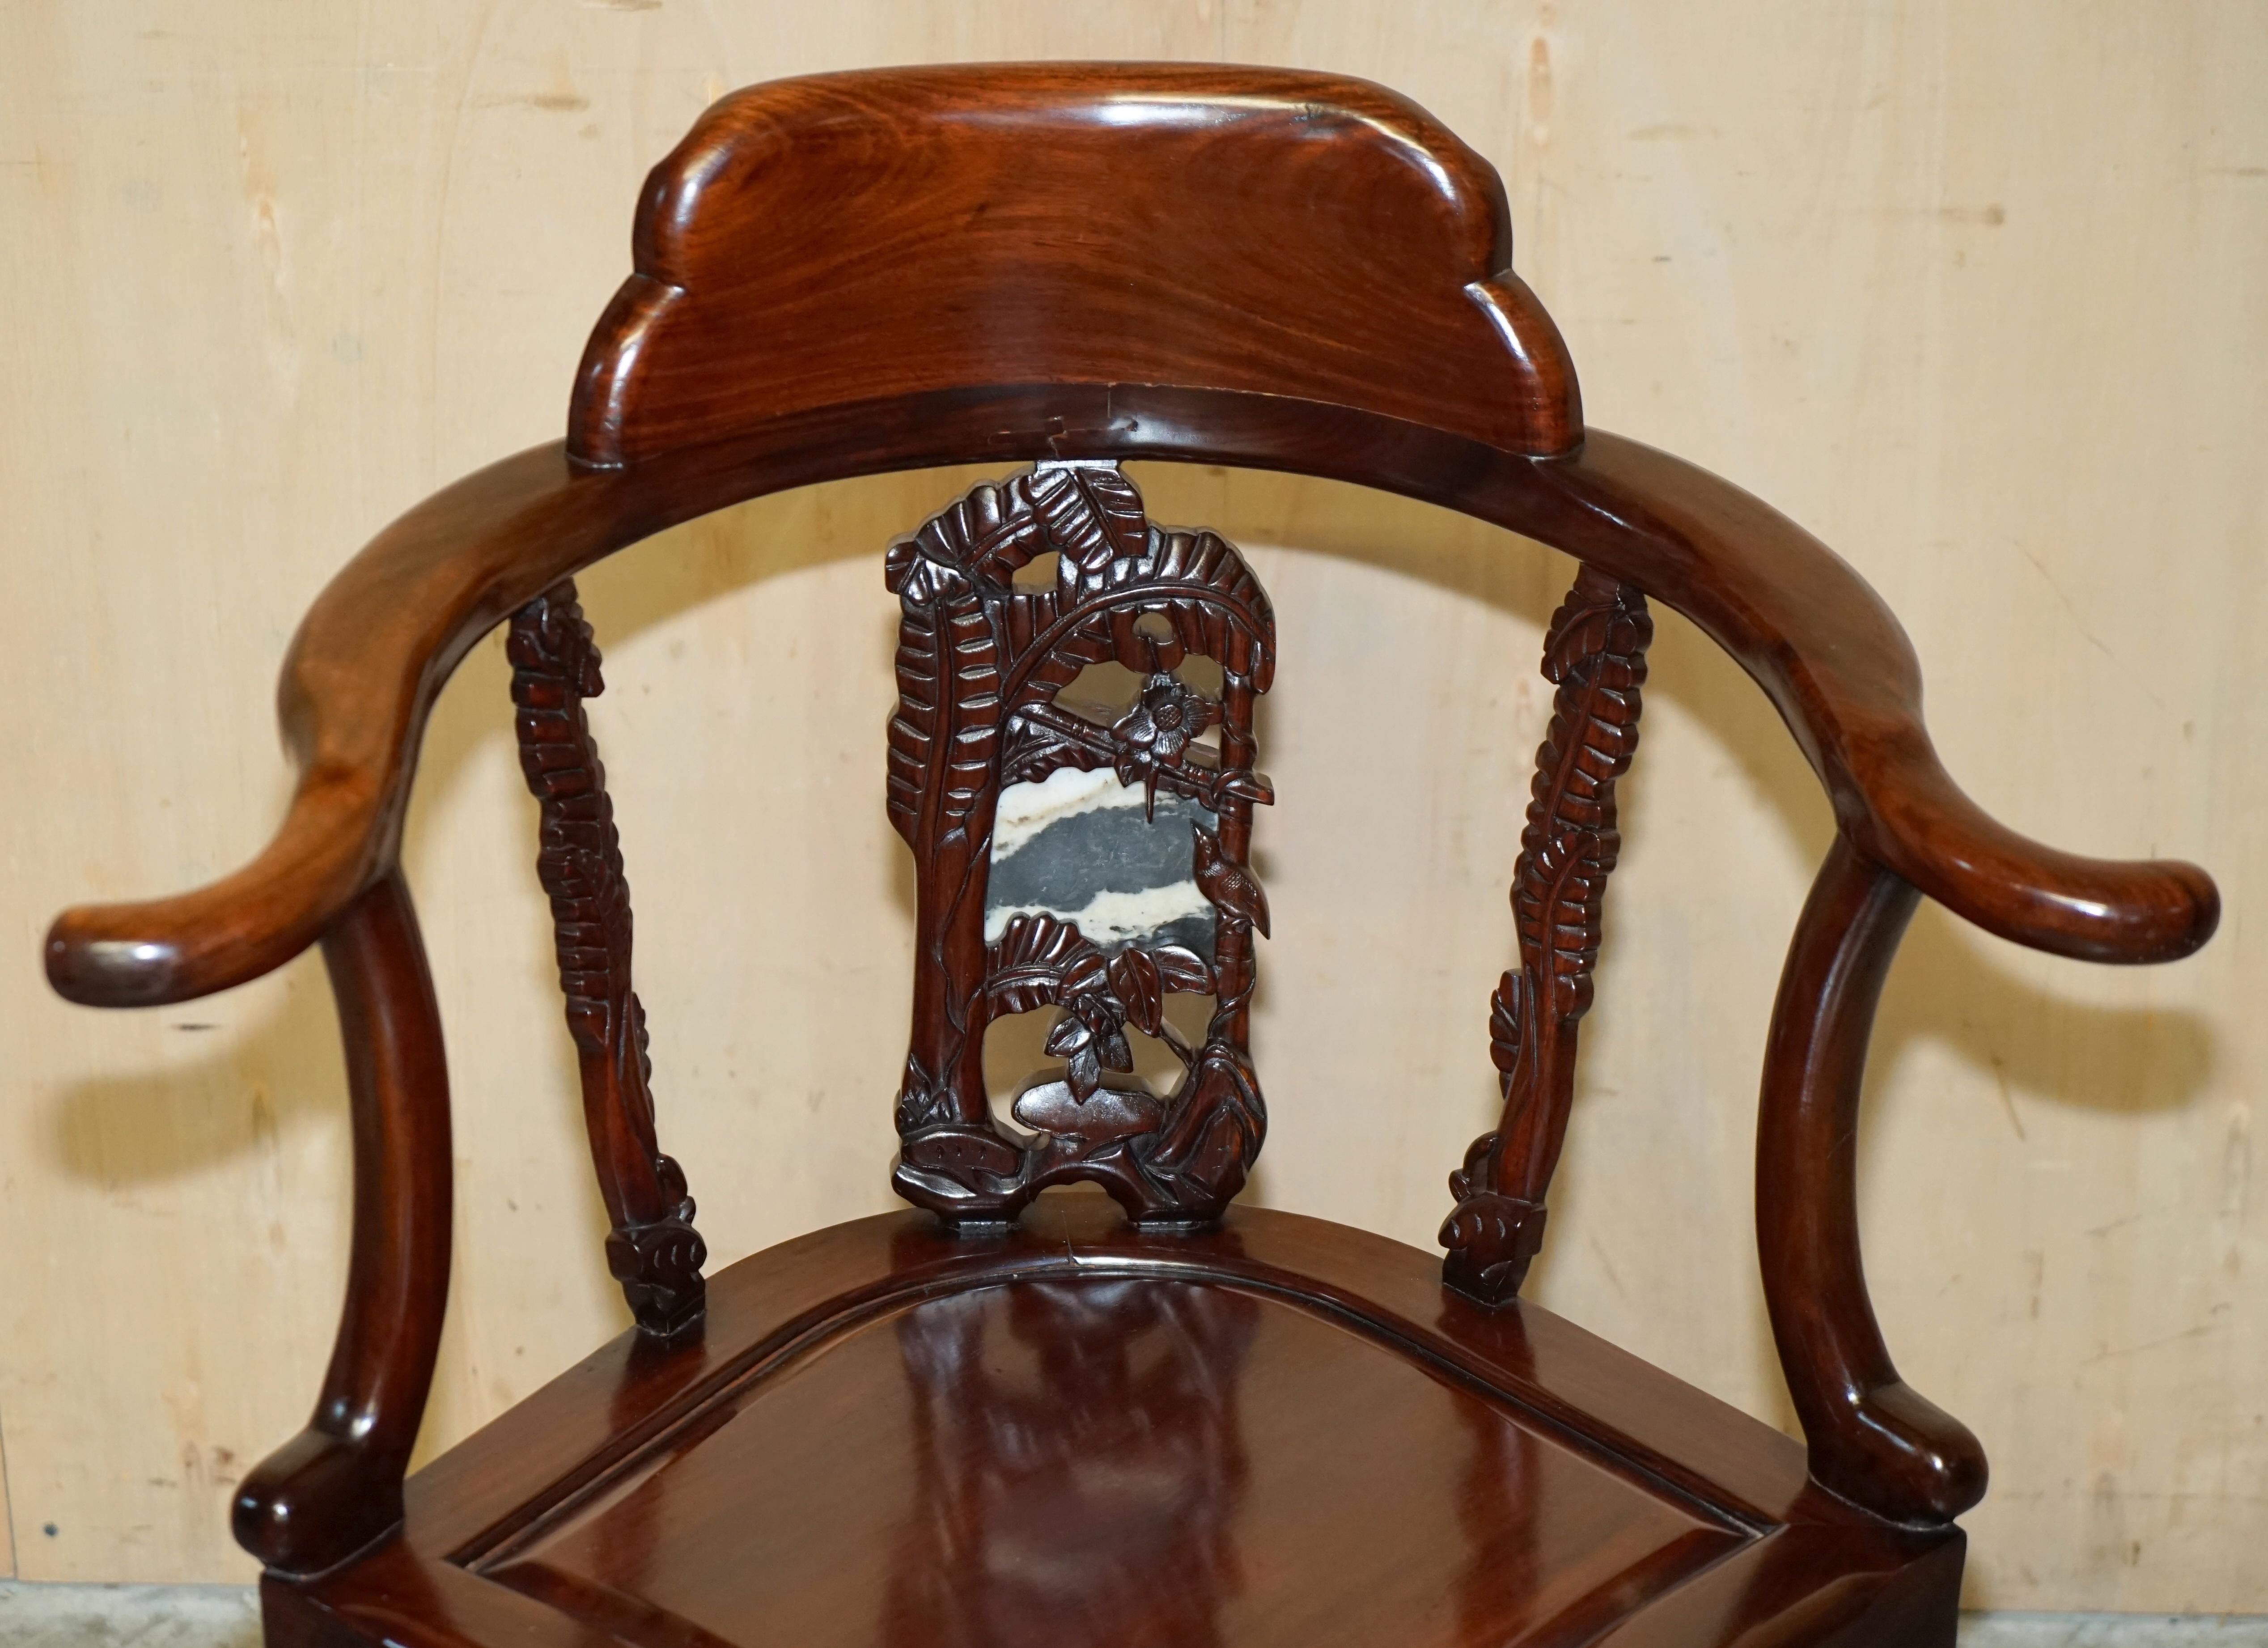 Royal House Antiques

Royal House Antiques is delighted to offer for sale this very rare and highly collectable Chinese Republic period circa 1900 Rosewood with marble inset panel, revolving swivel office chair 

Please note the delivery fee listed